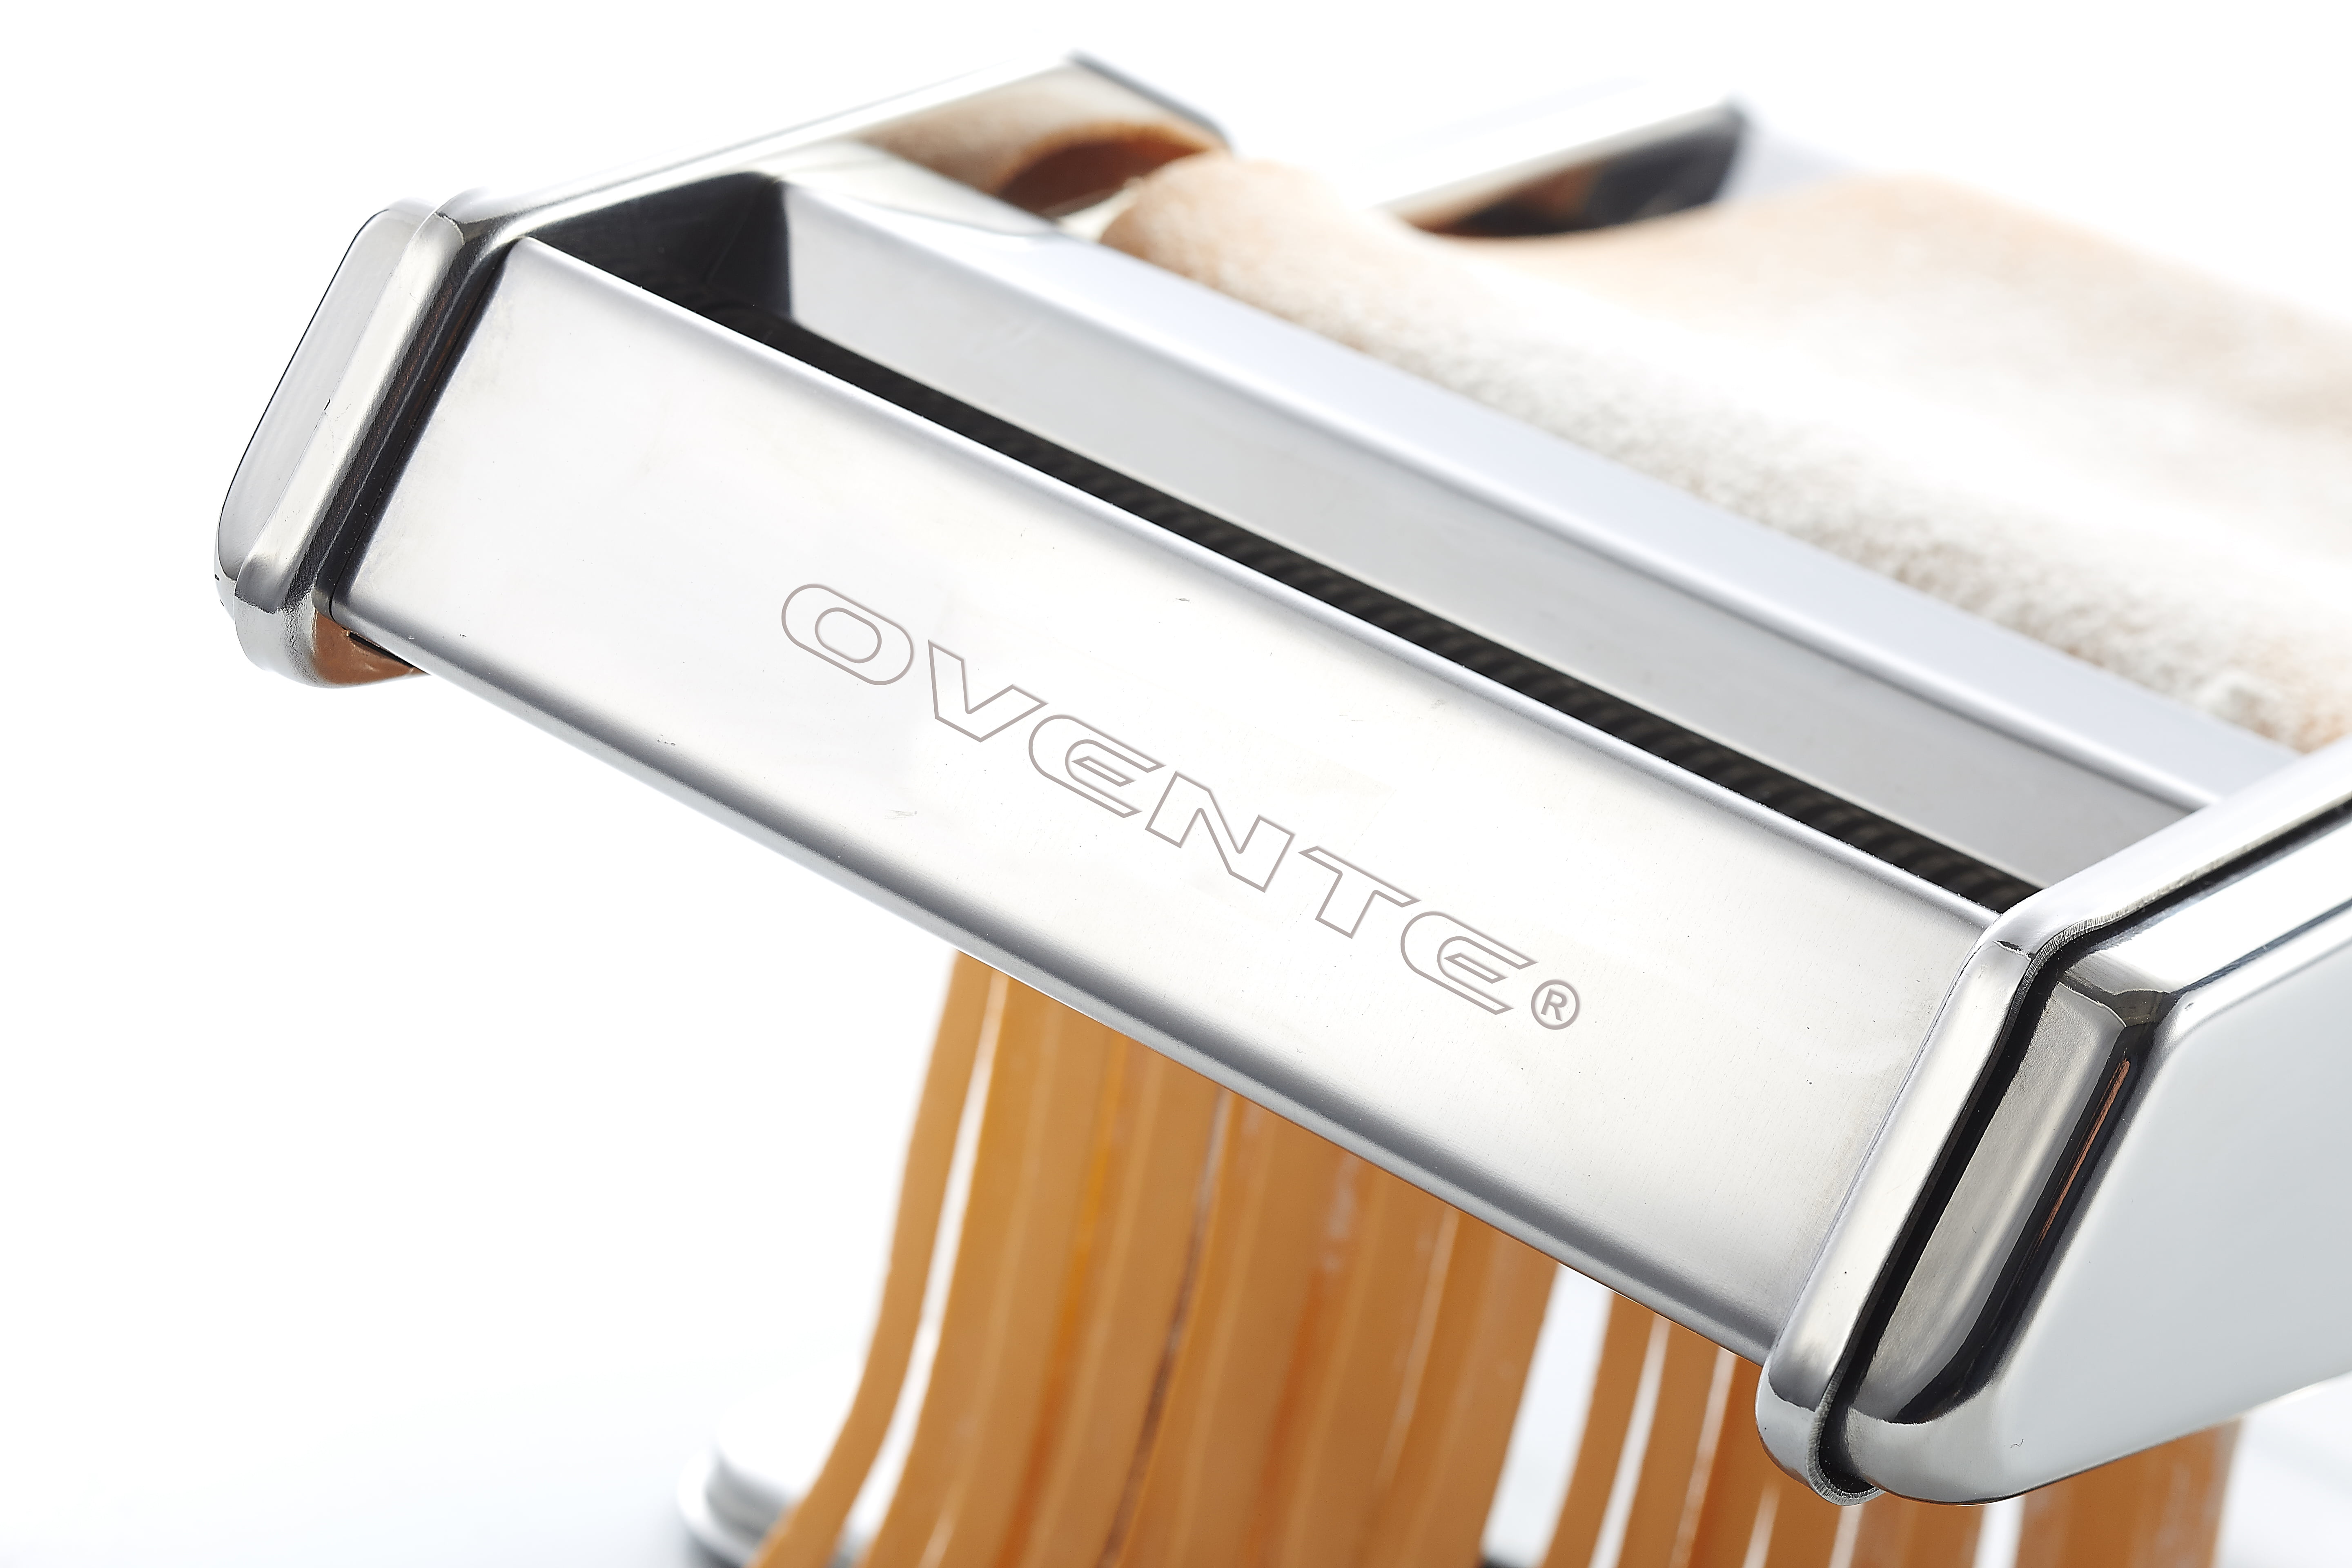 Ovente Vintage Stainless Steel Pasta Maker (PA515 Series)